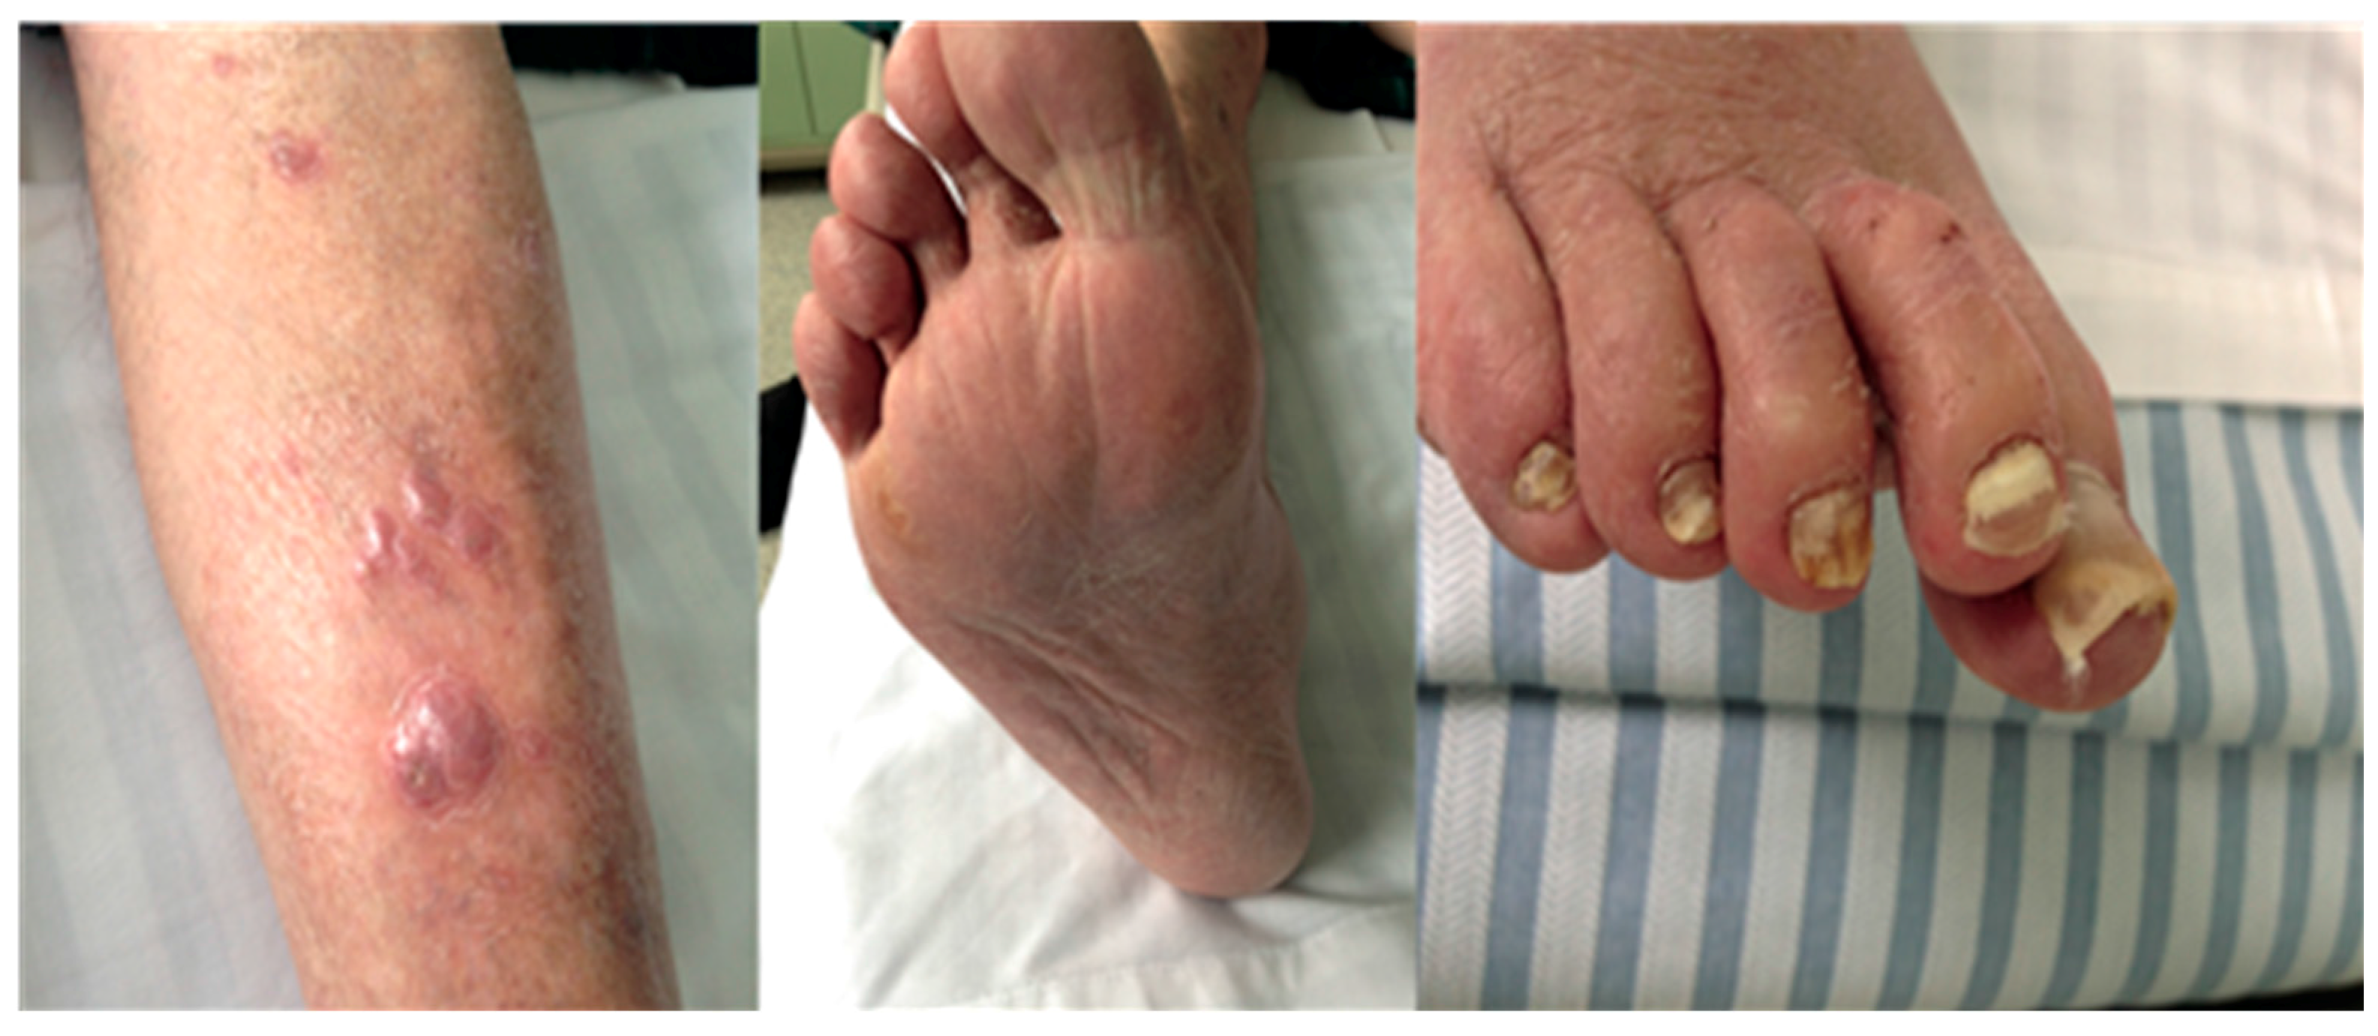 Tinea pedis and Tinea unguium caused by Trichophyton rubrum in an